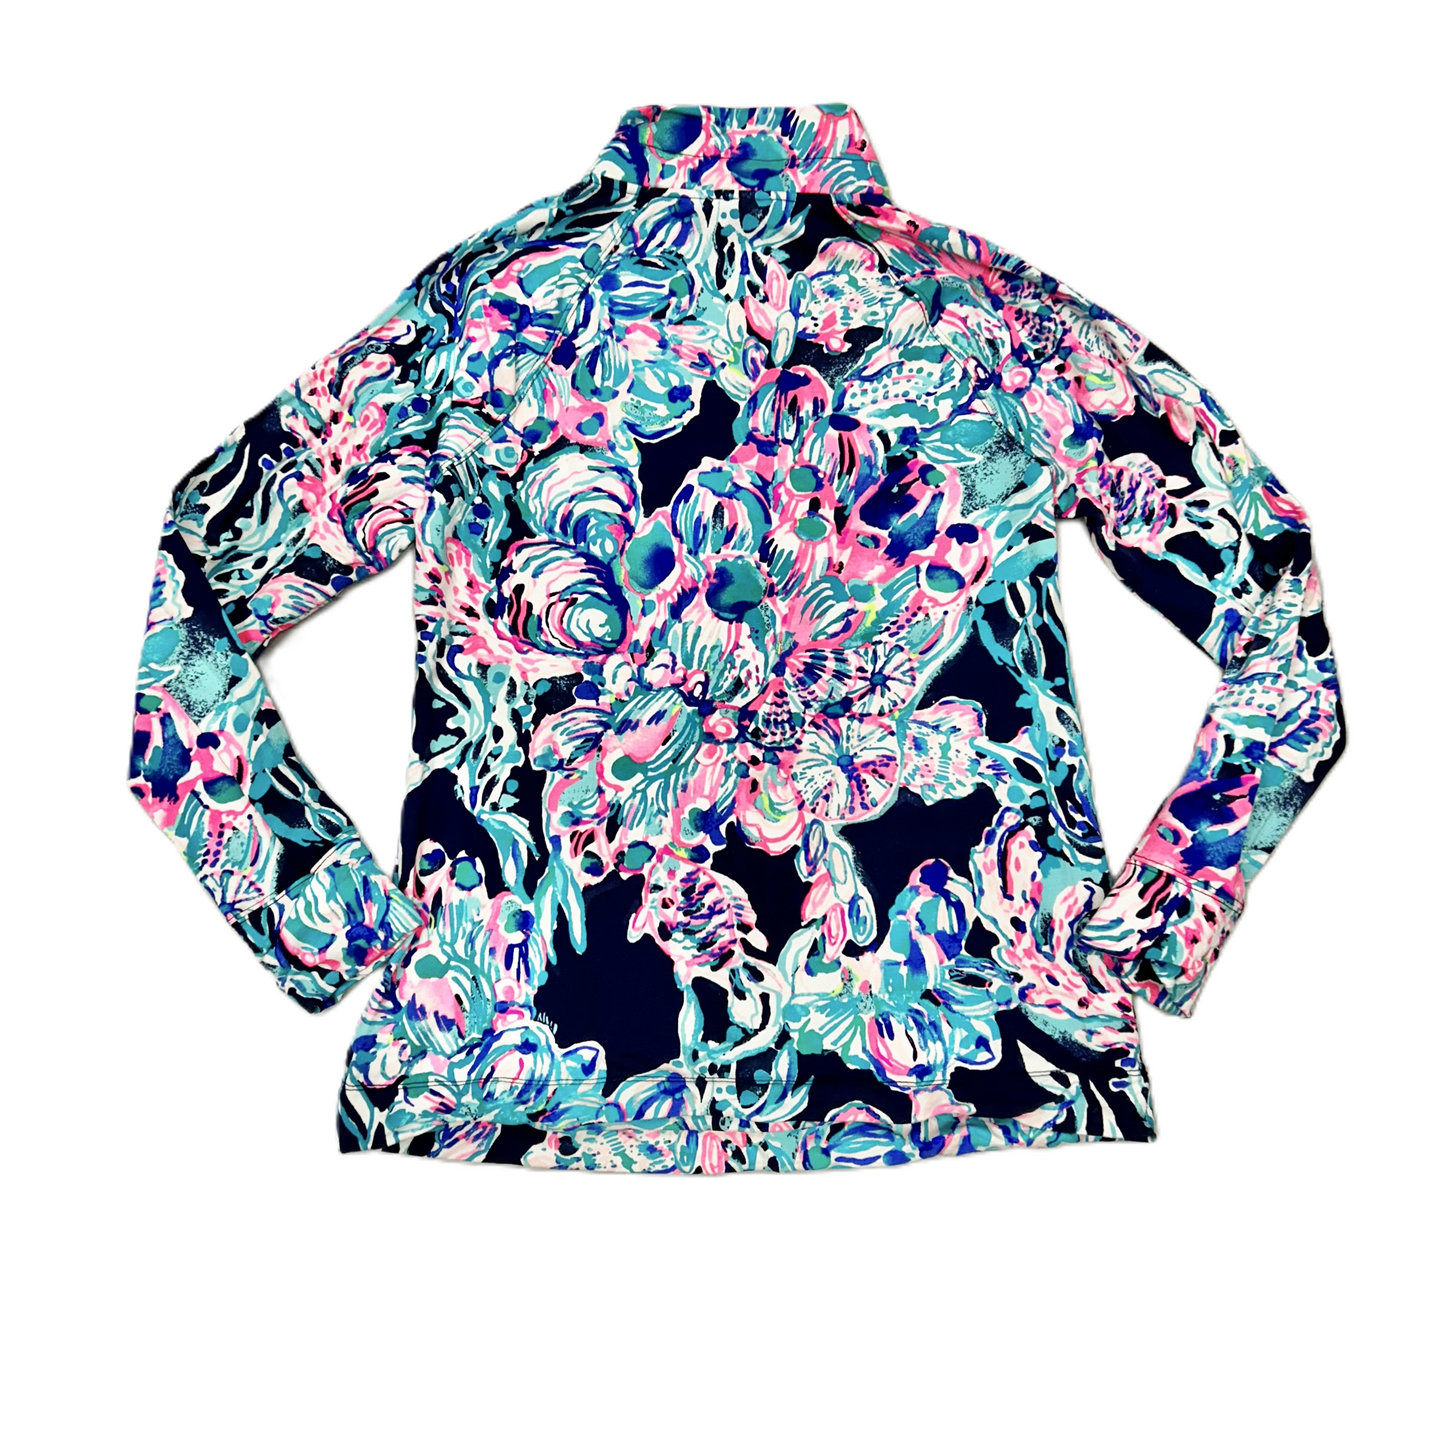 Blue & Pink Jacket Designer By Lilly Pulitzer, Size: S